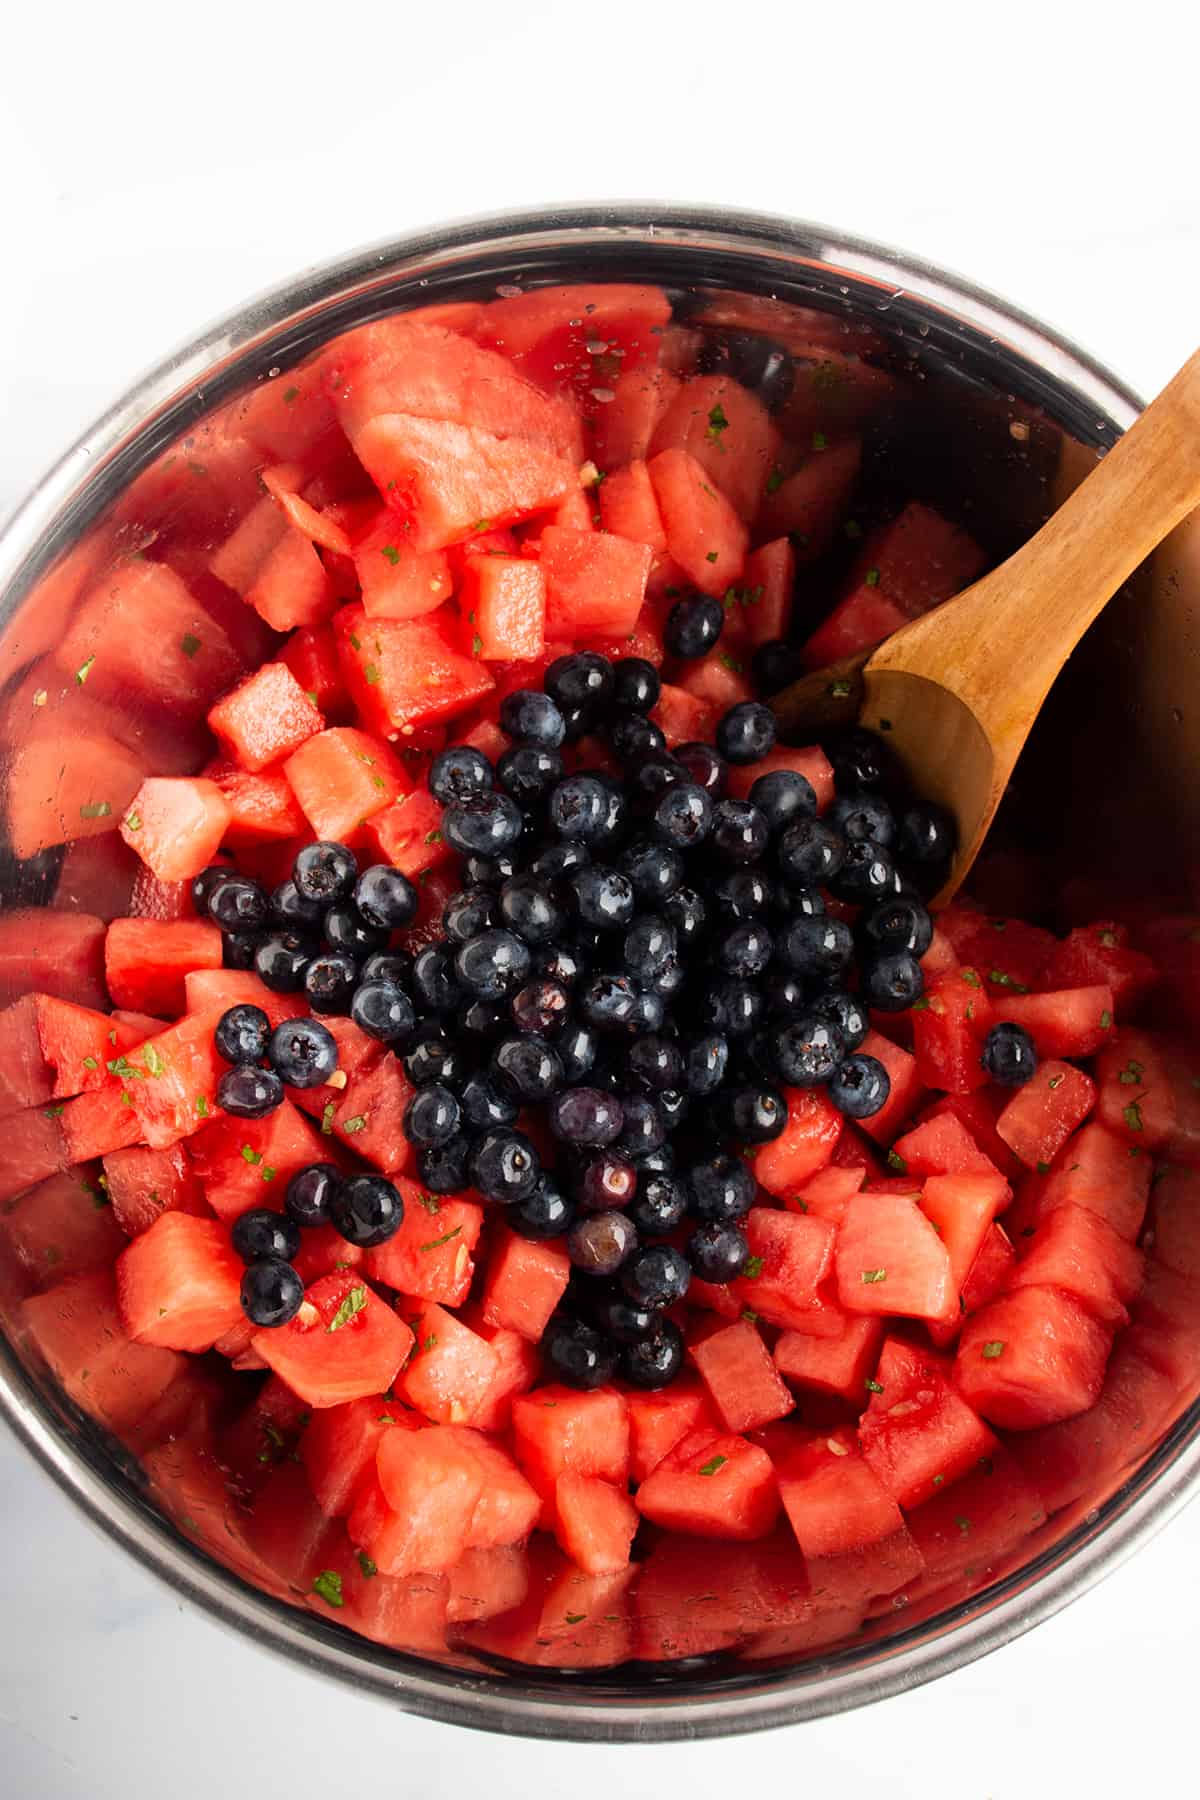 Metal bowl with diced watermelon and fresh blueberries on top with a wooden spoon.